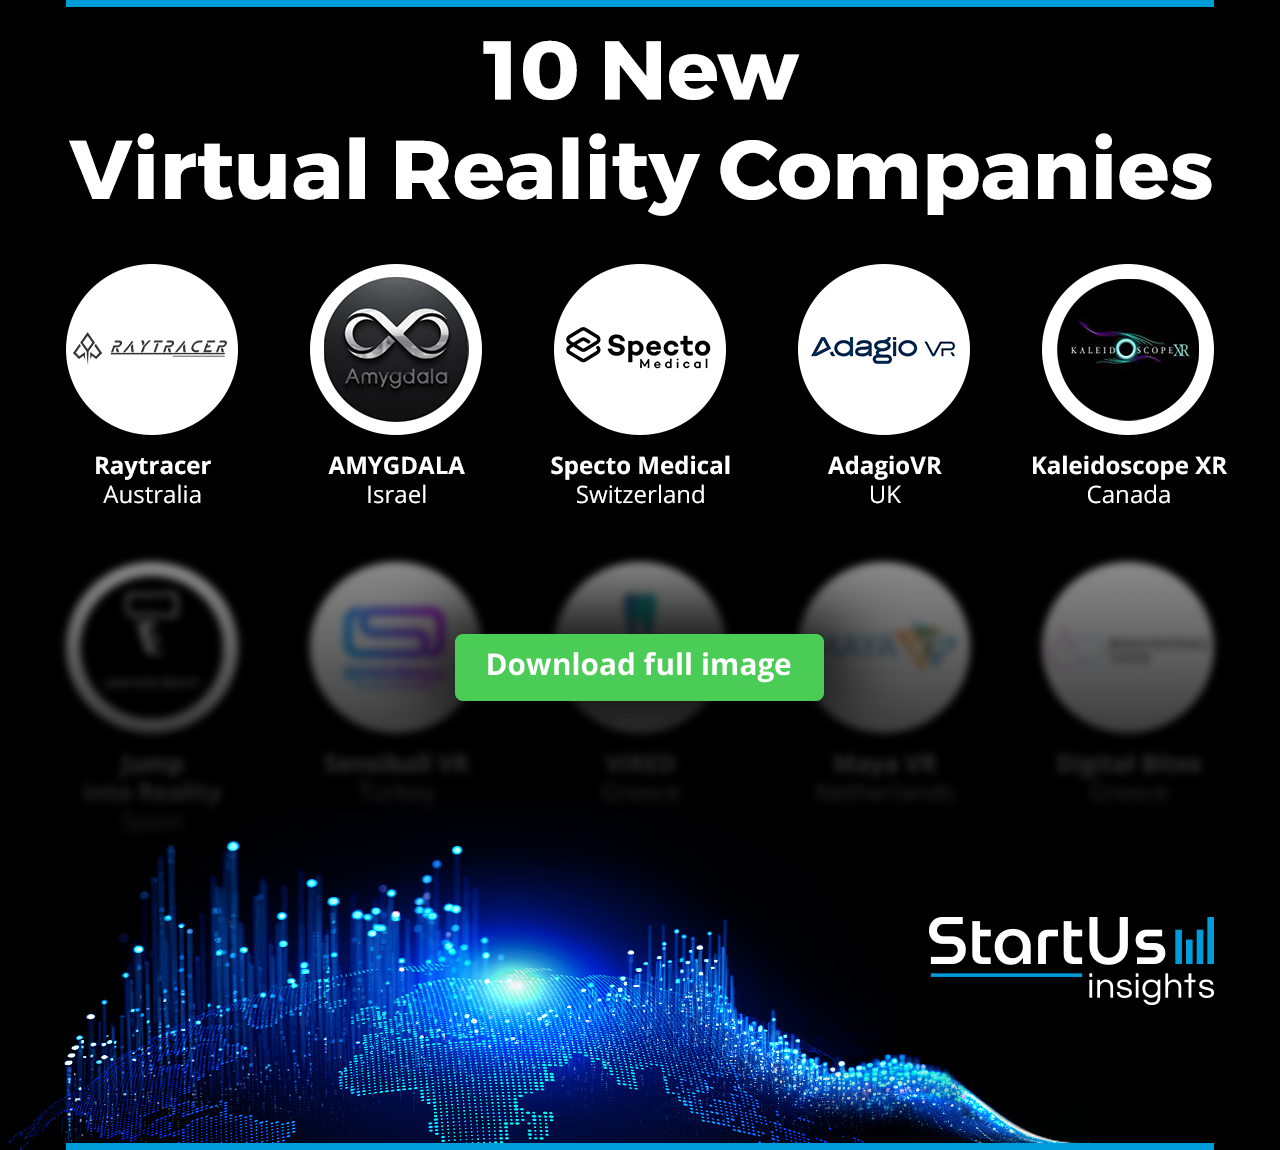 New-Virtual-Reality-Companies-Logos-Blurred-StartUs-Insights-noresize